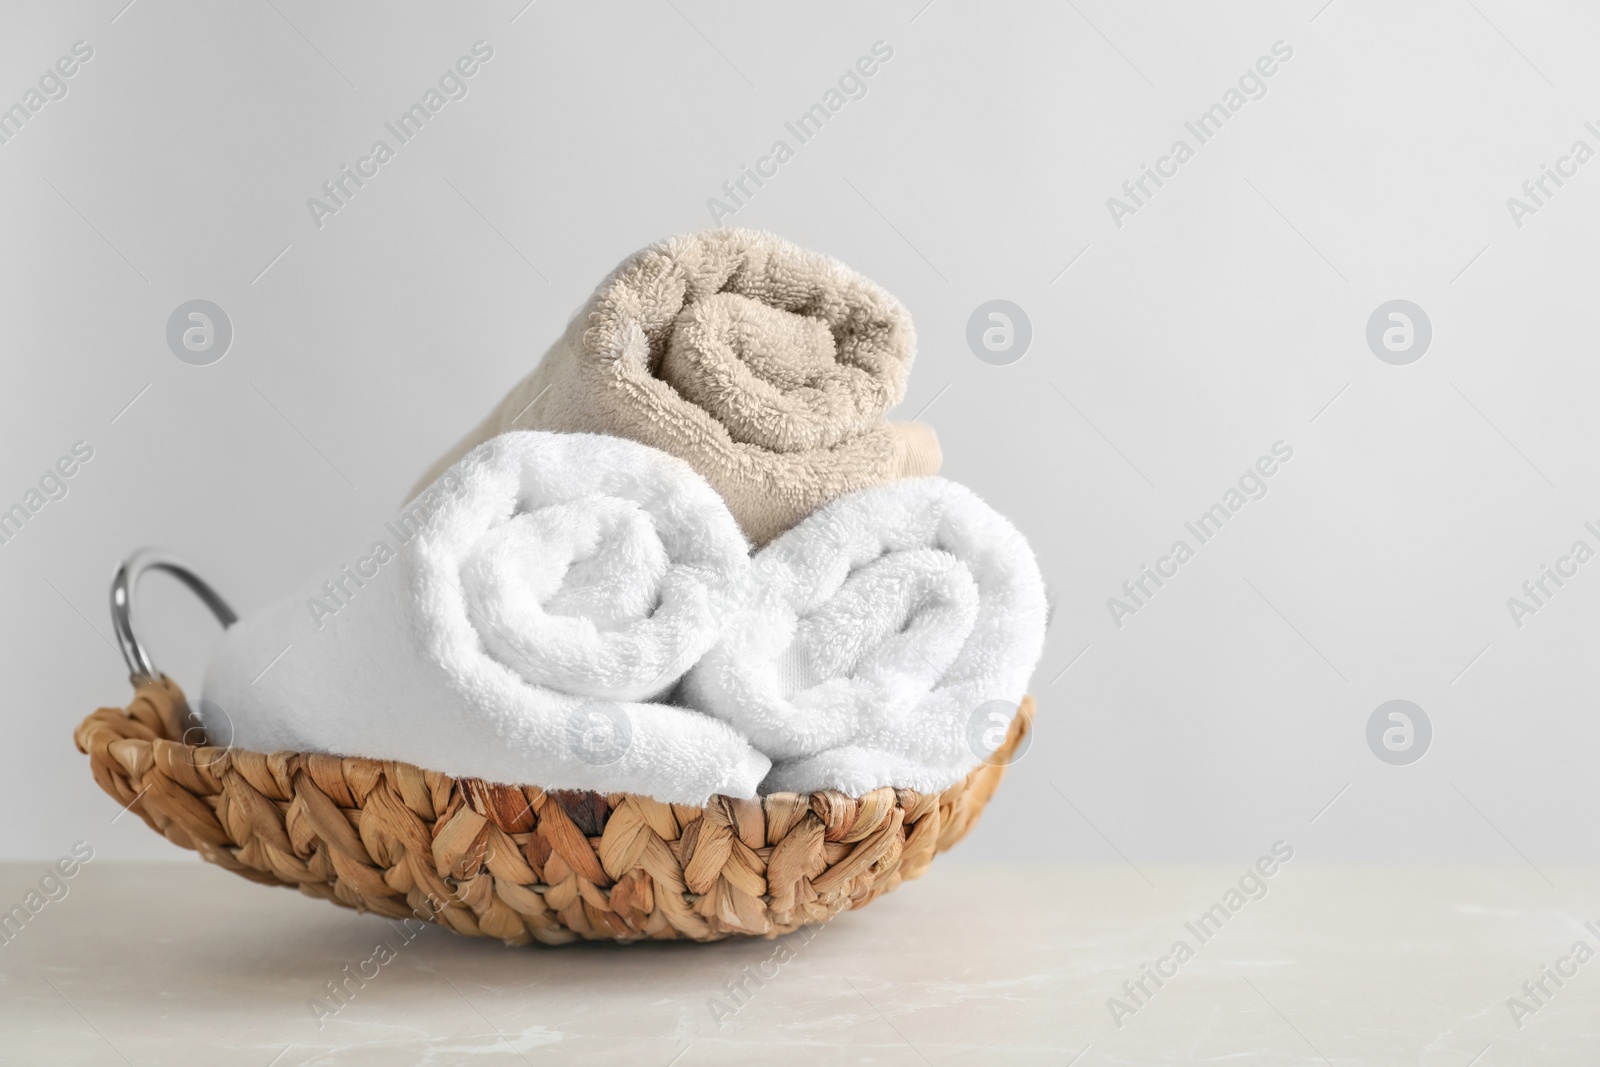 Photo of Basket with clean towels on table against light background